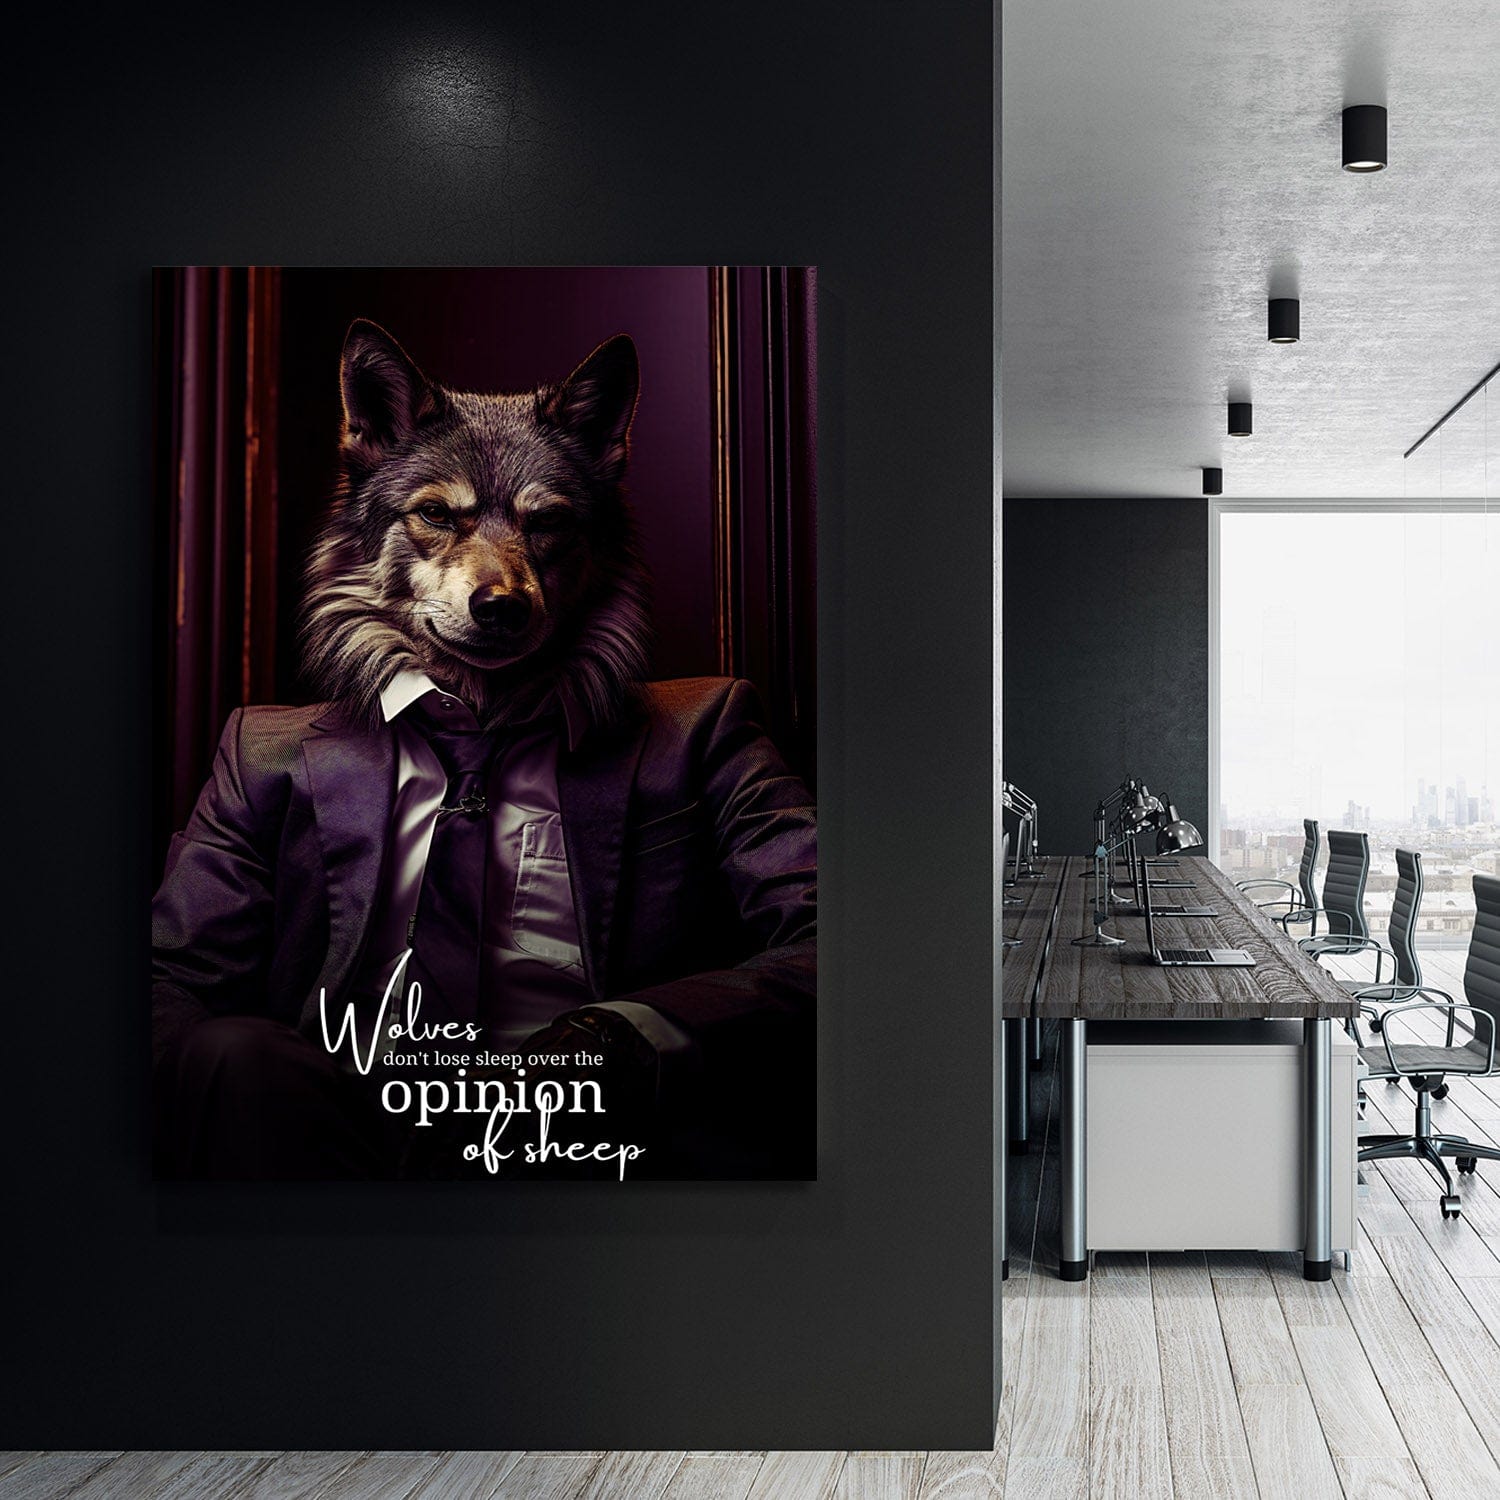 Wolves don't lose sleep over the opinion of sheep Wall Art Inspirational  Wall Art Motivational Wall Art Quotes Office Art ImpaktMaker Exclusive